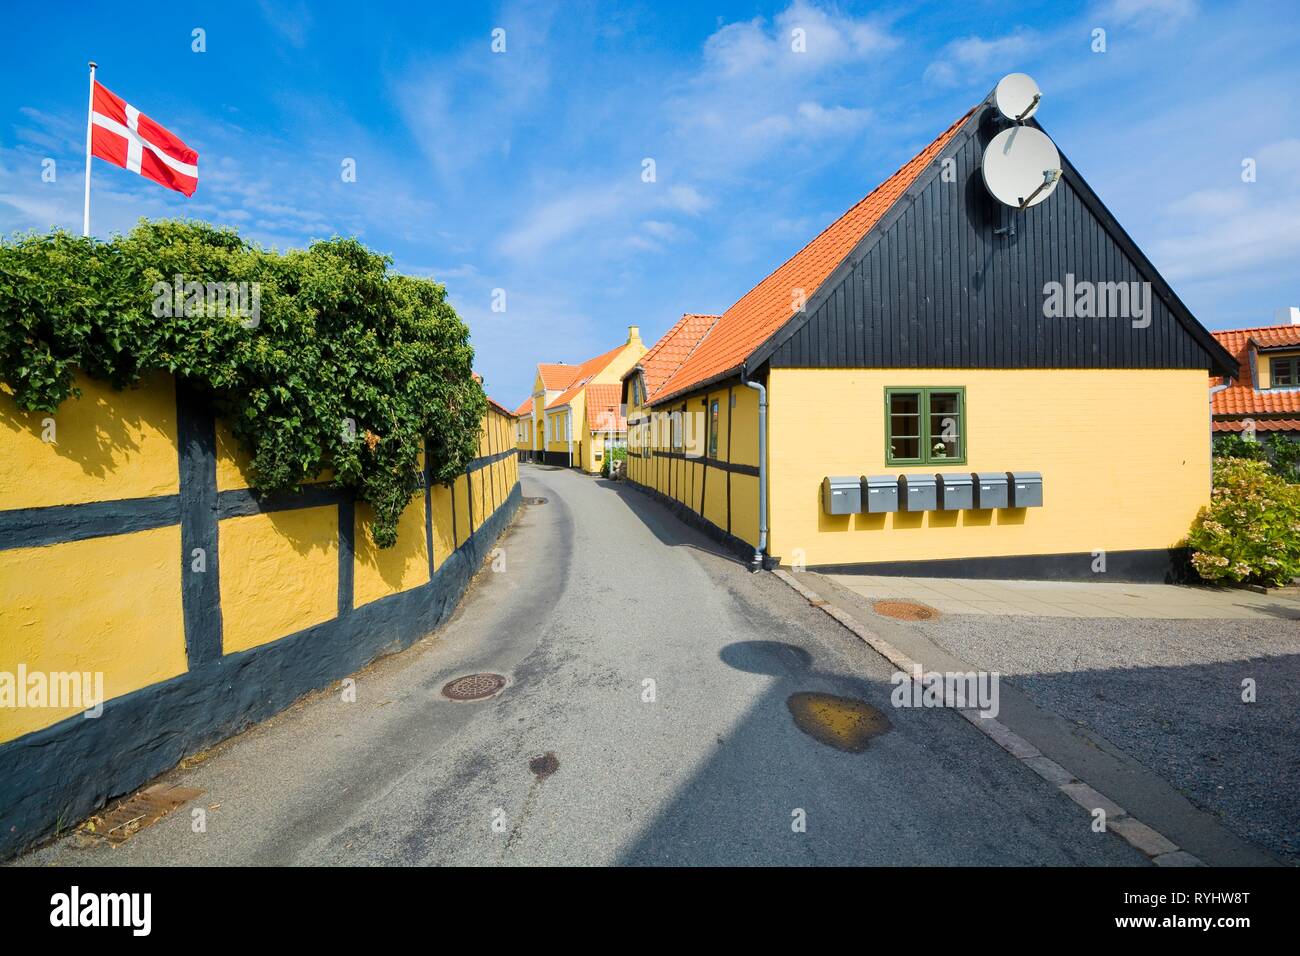 Traditional colorful half timbered houses in Allinge, Bornholm, Denmark Stock Photo